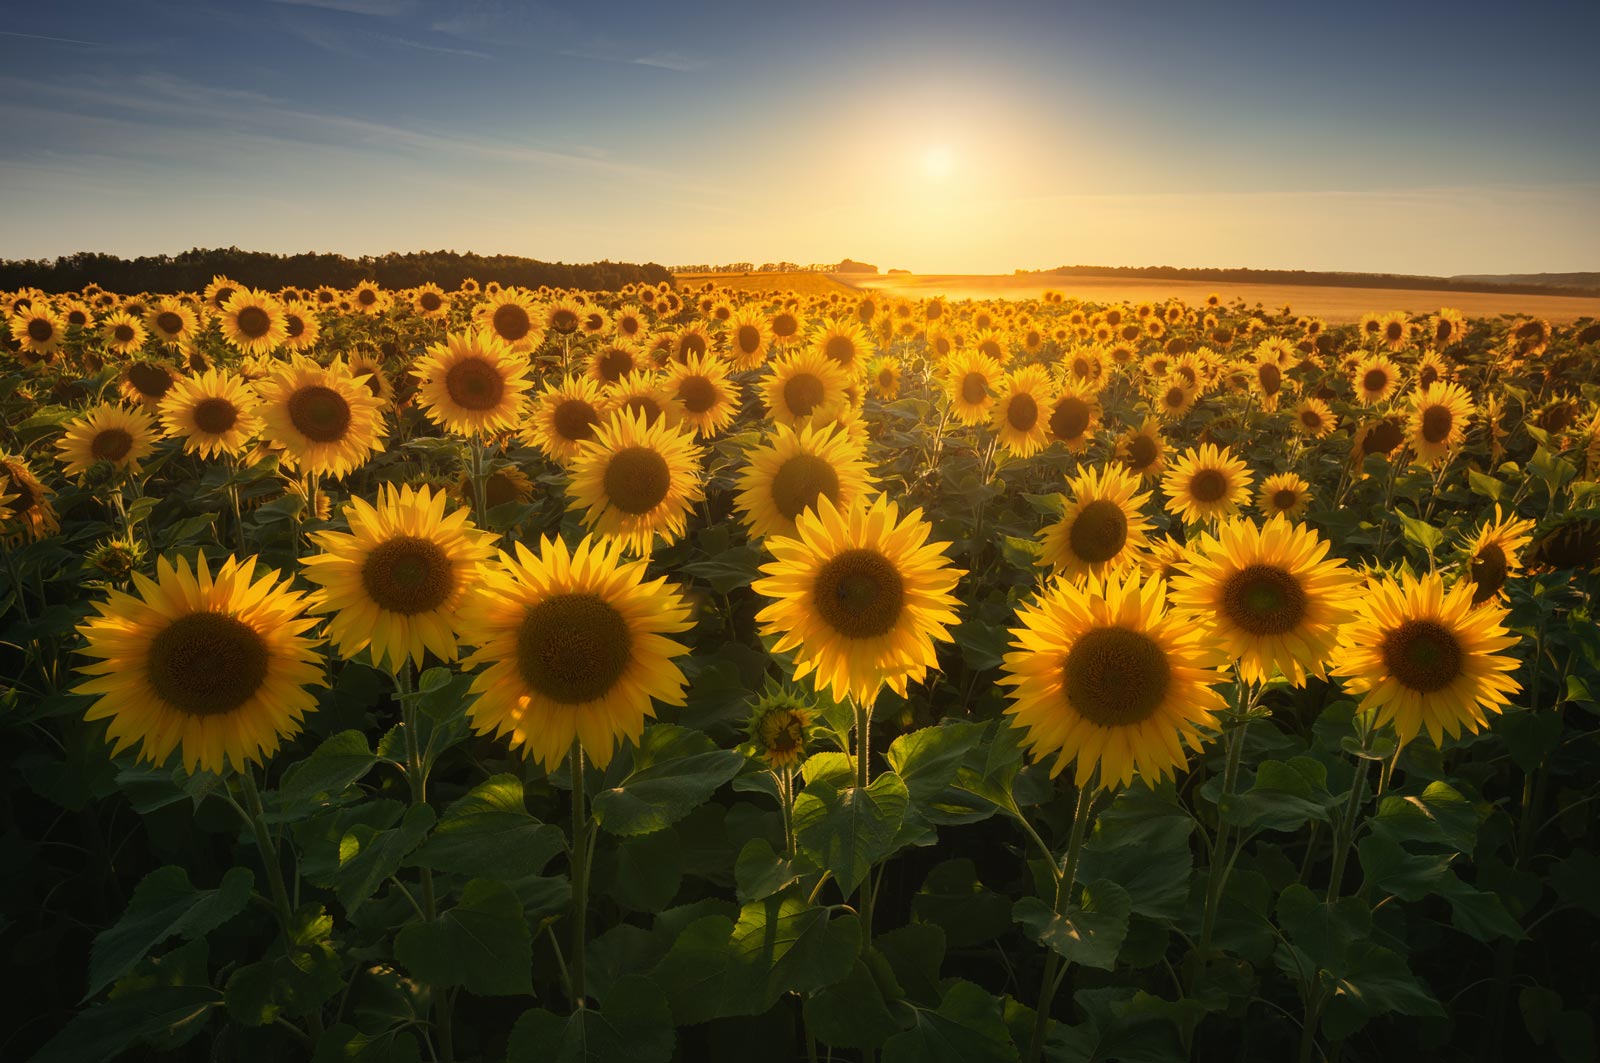 A horticulture crop field filled with sunflowers